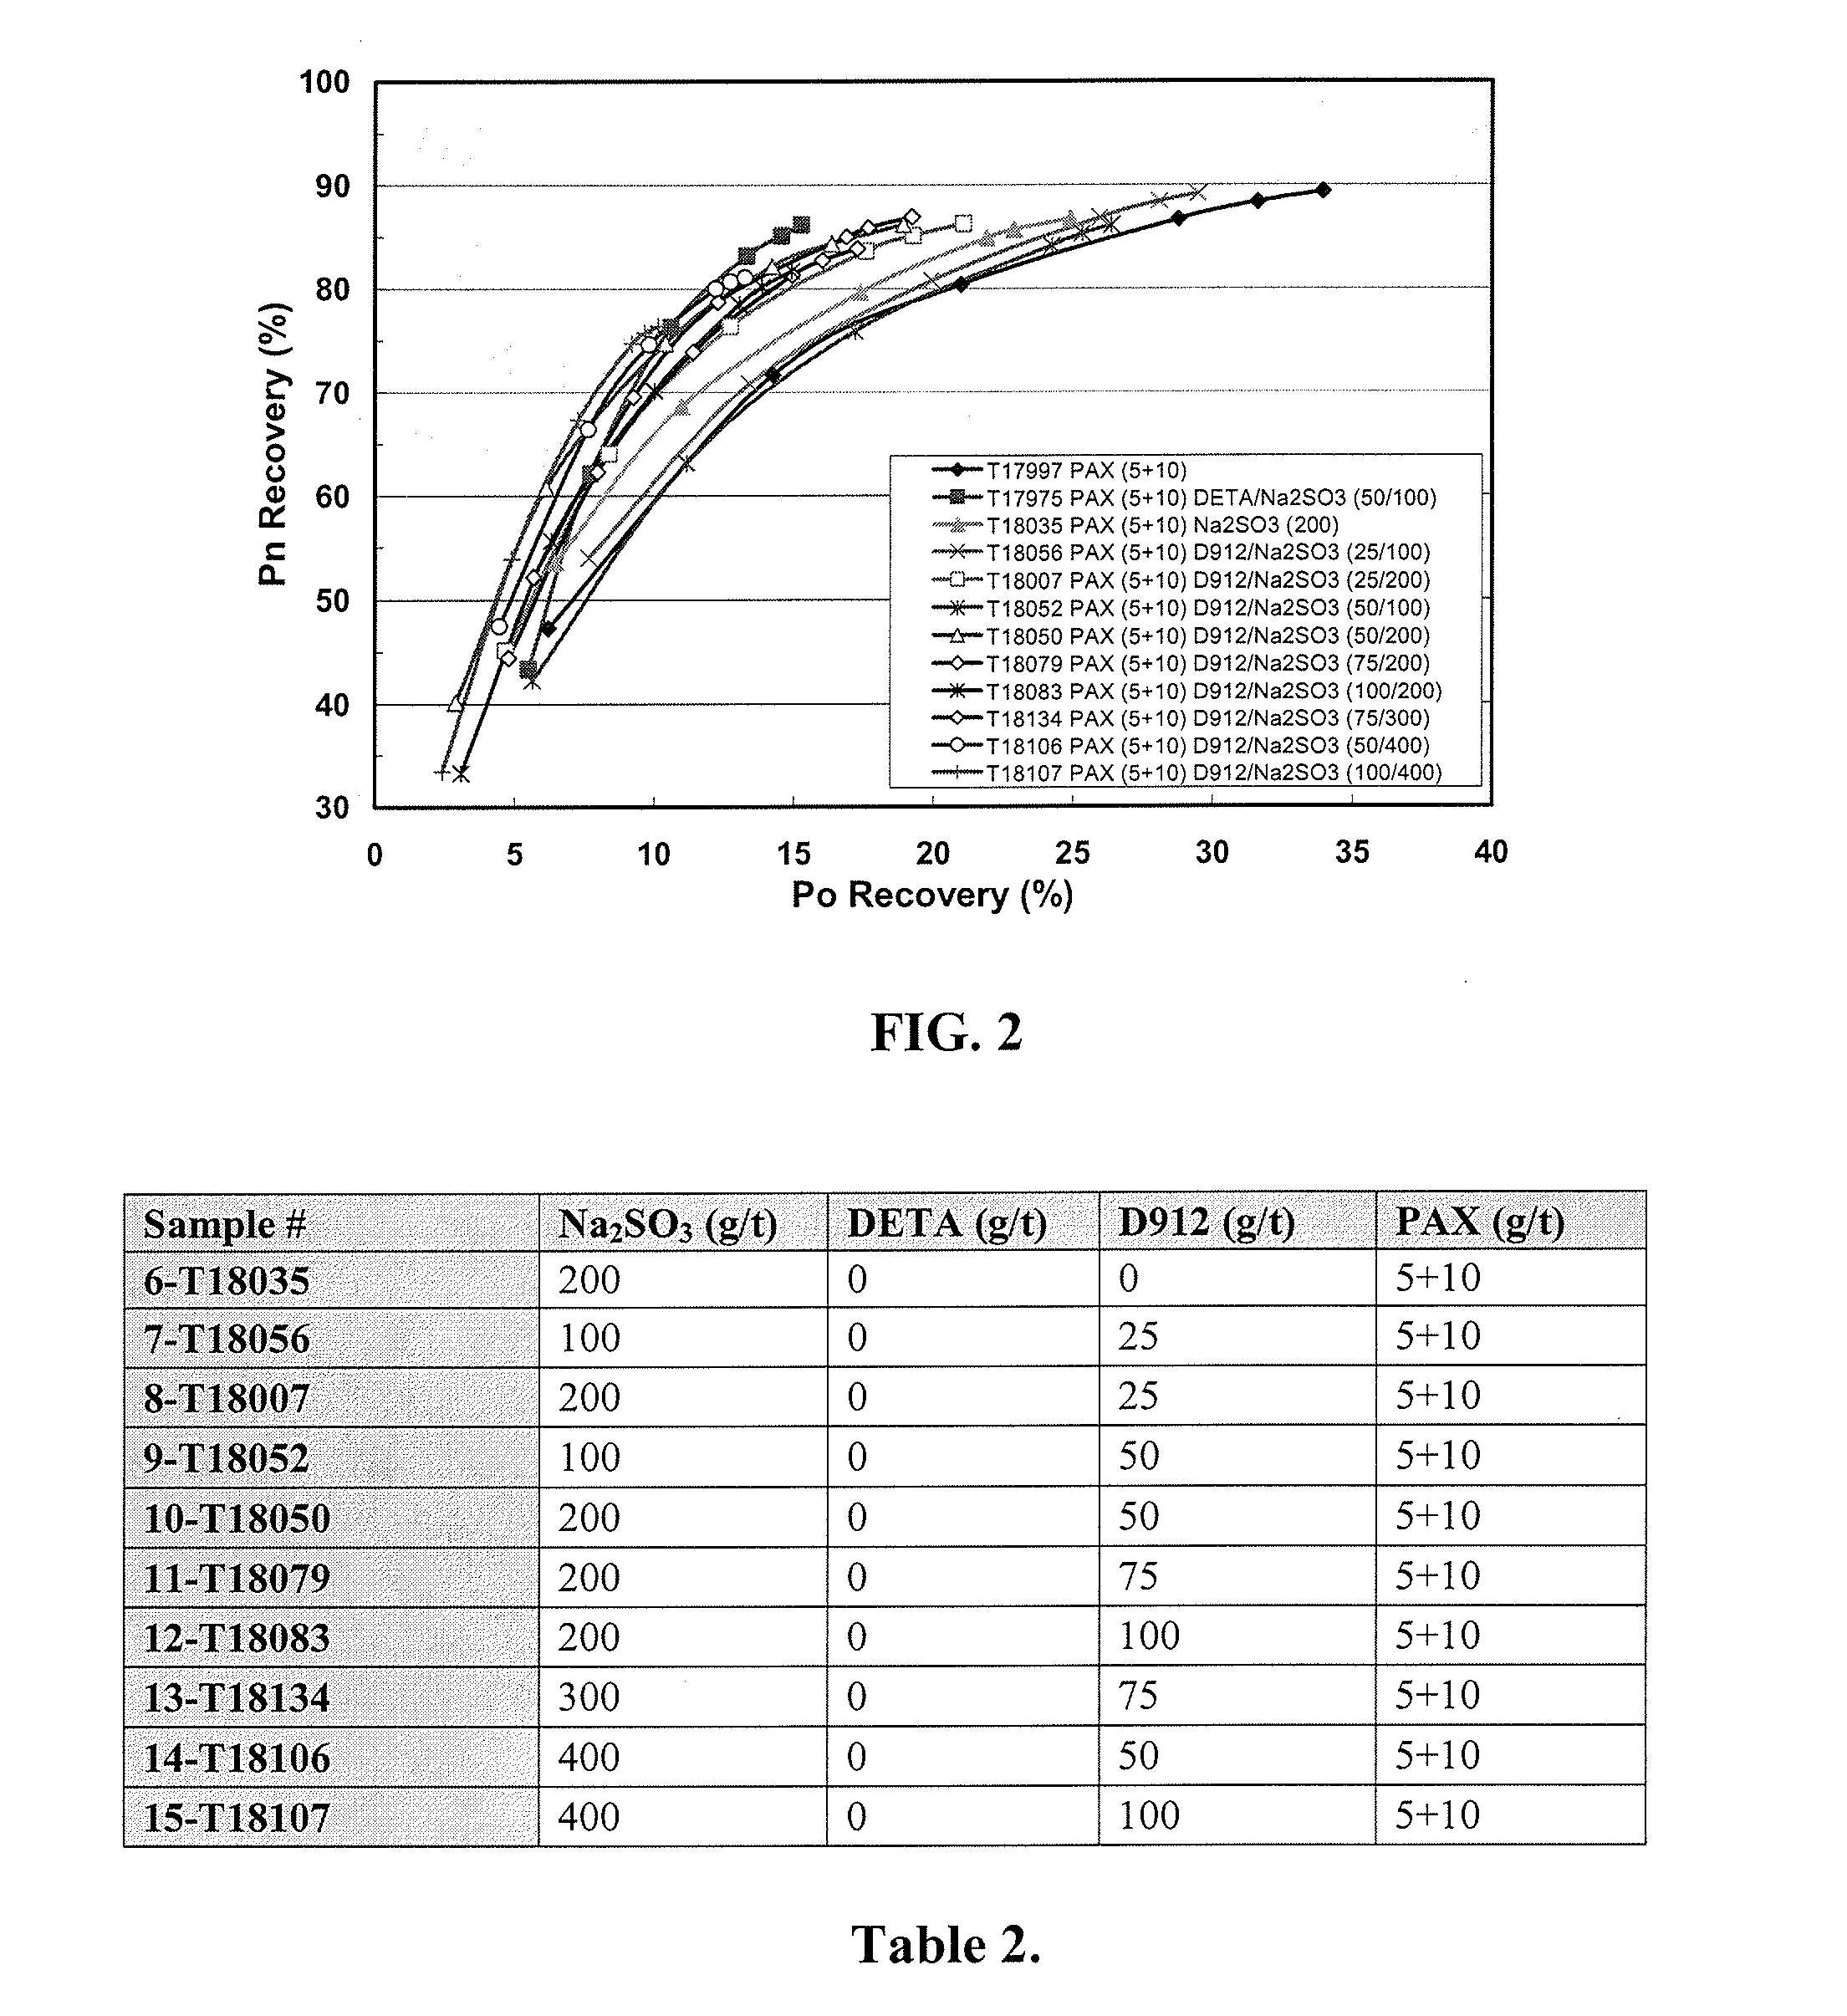 Method for improving selectivity and recovery in the flotation of nickel sulphide ores that contain pyrrhotite by exploiting the synergy of multiple depressants